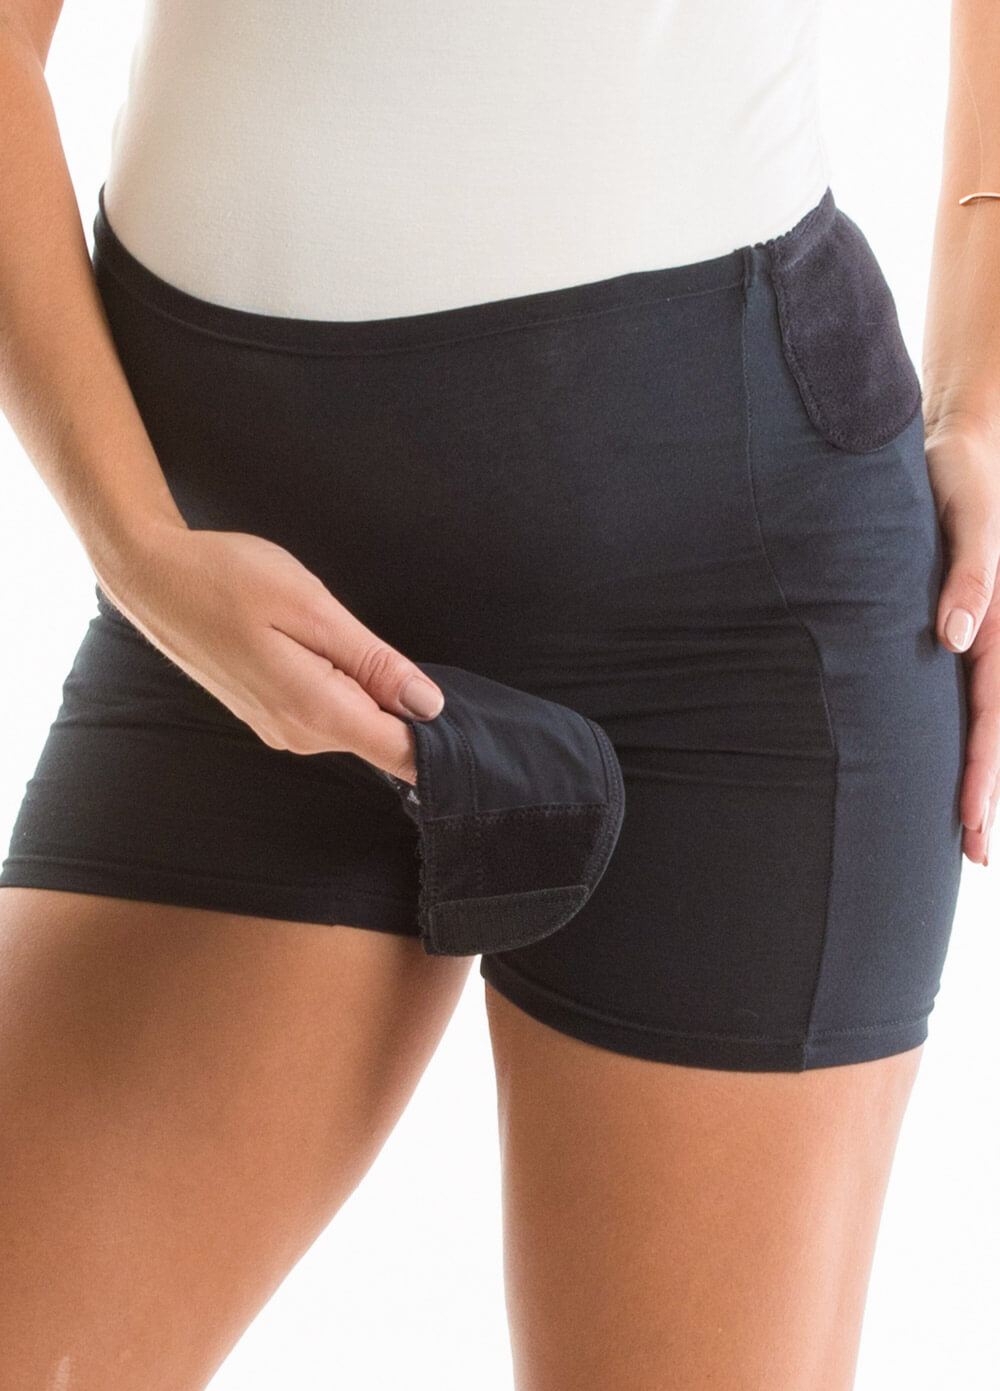  Tiana Adjustable Pregnancy Support Shorts in Black by Queen Bee